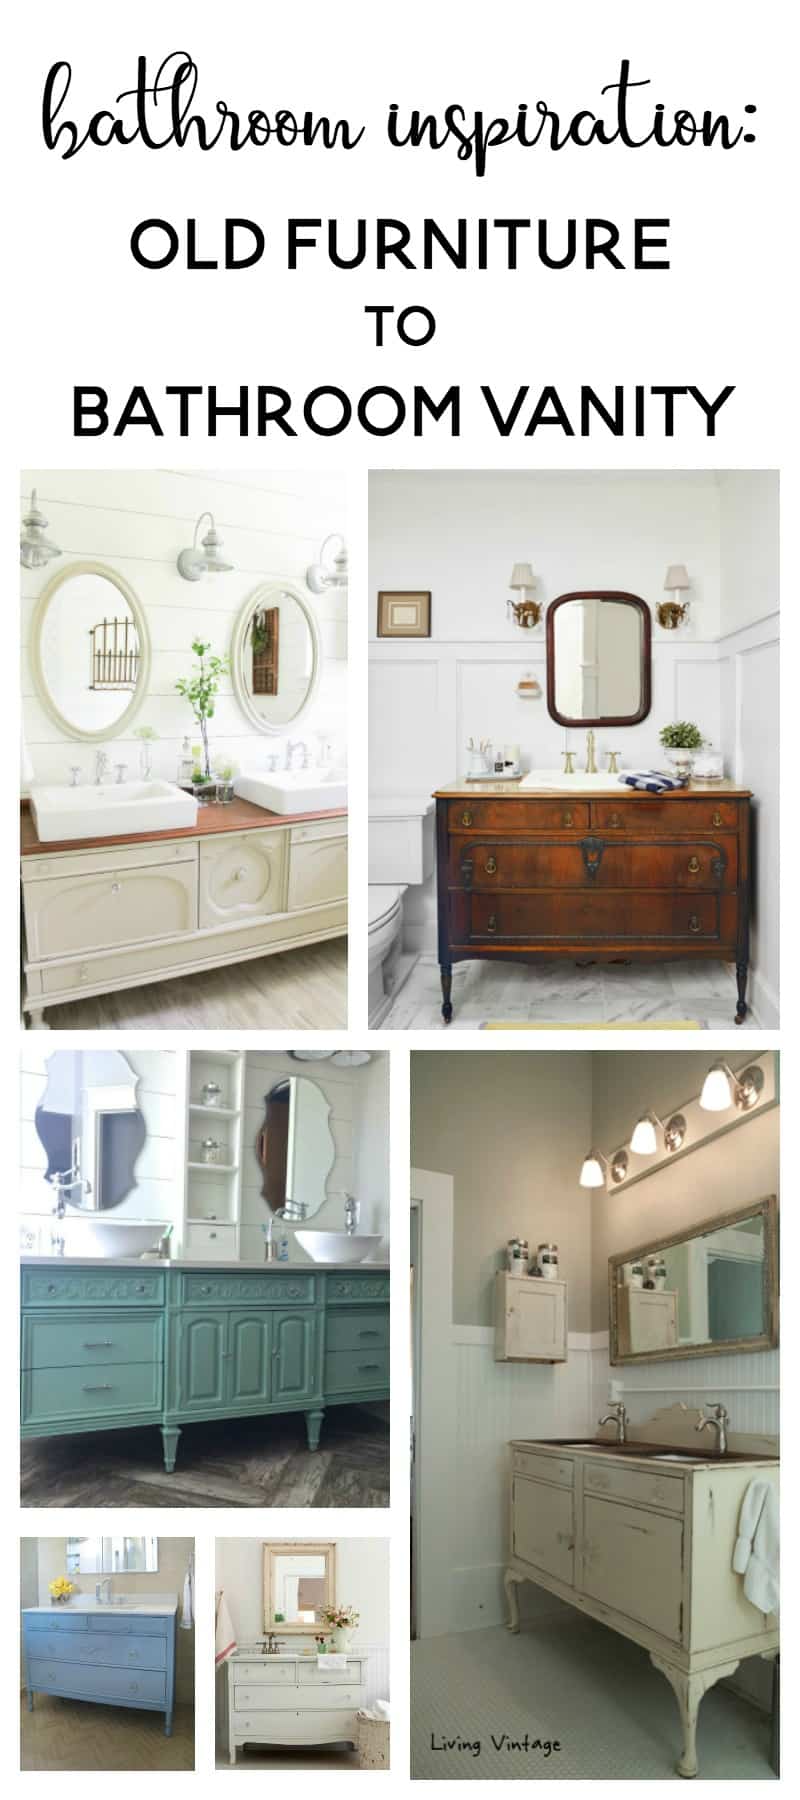 Using bathroom vanities made out of old dressers is a great way to save some money when renovating a bathroom